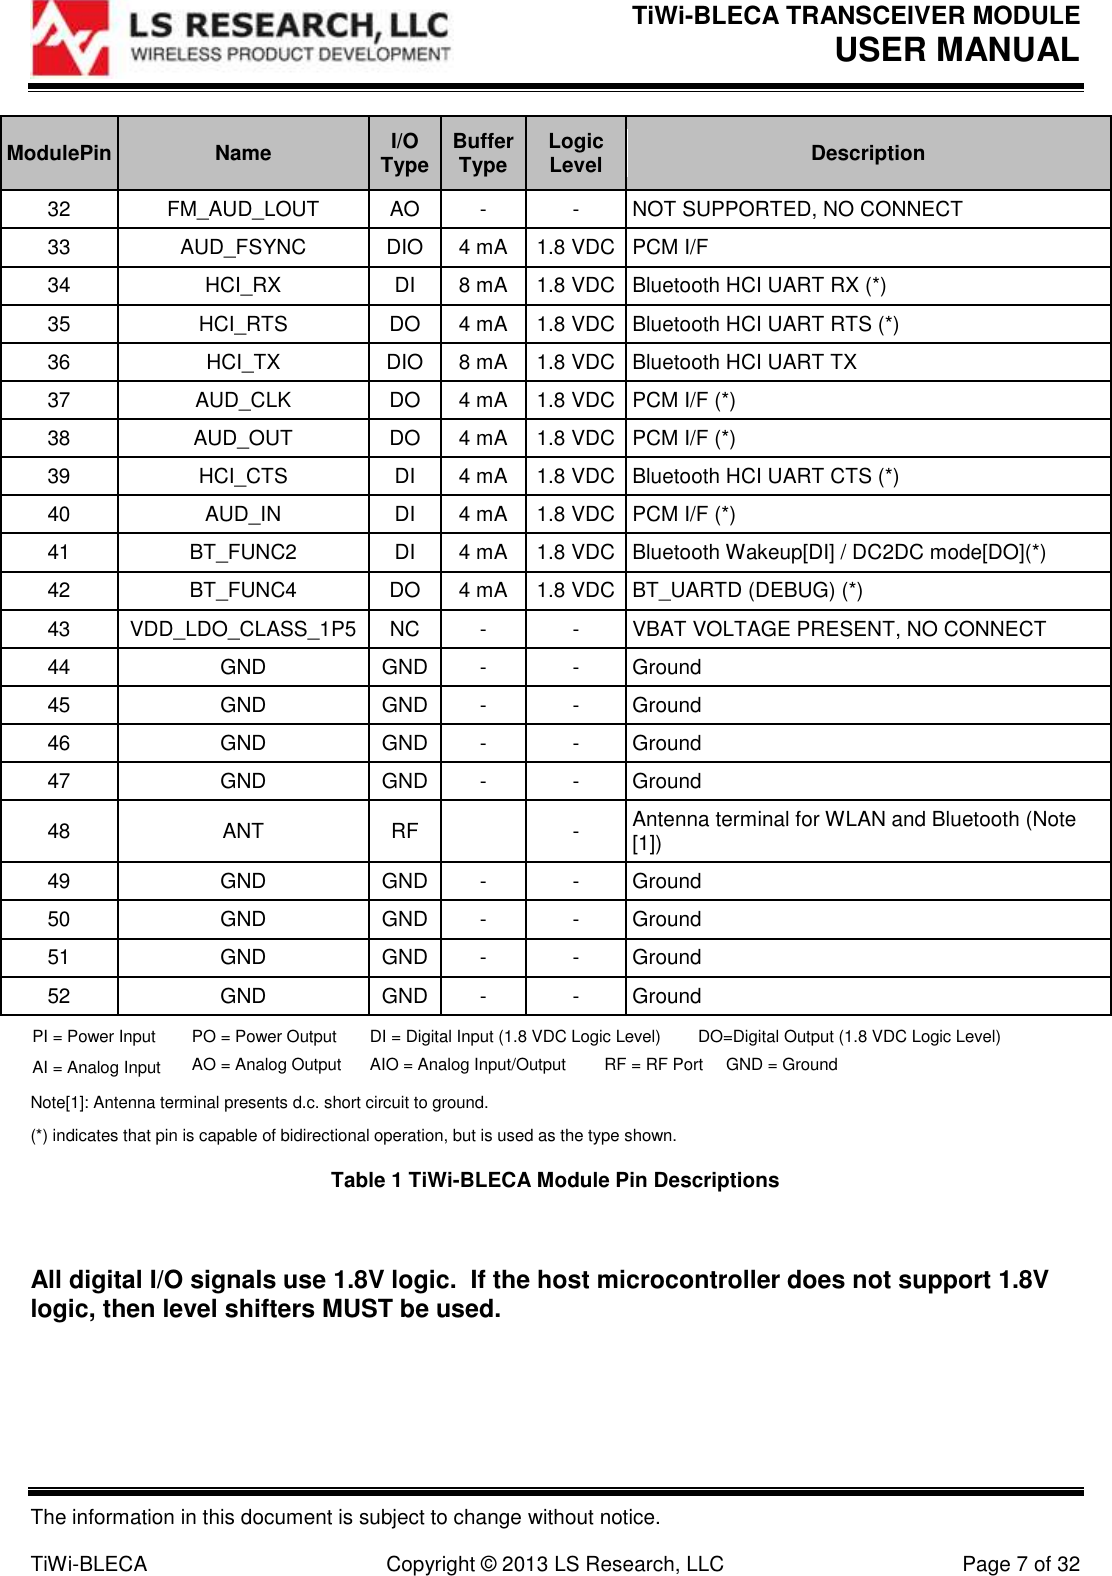 TiWi-BLECA TRANSCEIVER MODULE USER MANUAL   The information in this document is subject to change without notice.  TiWi-BLECA  Copyright © 2013 LS Research, LLC  Page 7 of 32 ModulePin Name I/O Type Buffer Type Logic Level Description 32 FM_AUD_LOUT AO - - NOT SUPPORTED, NO CONNECT 33 AUD_FSYNC DIO 4 mA 1.8 VDC PCM I/F 34 HCI_RX DI 8 mA 1.8 VDC Bluetooth HCI UART RX (*) 35 HCI_RTS DO 4 mA 1.8 VDC Bluetooth HCI UART RTS (*) 36 HCI_TX DIO 8 mA 1.8 VDC Bluetooth HCI UART TX 37 AUD_CLK DO 4 mA 1.8 VDC PCM I/F (*) 38 AUD_OUT DO 4 mA 1.8 VDC PCM I/F (*) 39 HCI_CTS DI 4 mA 1.8 VDC Bluetooth HCI UART CTS (*) 40 AUD_IN DI 4 mA 1.8 VDC PCM I/F (*) 41 BT_FUNC2 DI 4 mA 1.8 VDC Bluetooth Wakeup[DI] / DC2DC mode[DO](*) 42 BT_FUNC4 DO 4 mA 1.8 VDC BT_UARTD (DEBUG) (*) 43 VDD_LDO_CLASS_1P5 NC - - VBAT VOLTAGE PRESENT, NO CONNECT 44 GND GND - - Ground 45 GND GND - - Ground 46 GND GND - - Ground 47 GND GND - - Ground 48 ANT RF  - Antenna terminal for WLAN and Bluetooth (Note [1]) 49 GND GND - - Ground 50 GND GND - - Ground 51 GND GND - - Ground 52 GND GND - - Ground PI = Power Input PO = Power Output DI = Digital Input (1.8 VDC Logic Level) DO=Digital Output (1.8 VDC Logic Level)  AI = Analog Input AO = Analog Output AIO = Analog Input/Output RF = RF Port GND = Ground   Note[1]: Antenna terminal presents d.c. short circuit to ground.  (*) indicates that pin is capable of bidirectional operation, but is used as the type shown.  Table 1 TiWi-BLECA Module Pin Descriptions  All digital I/O signals use 1.8V logic.  If the host microcontroller does not support 1.8V logic, then level shifters MUST be used.   